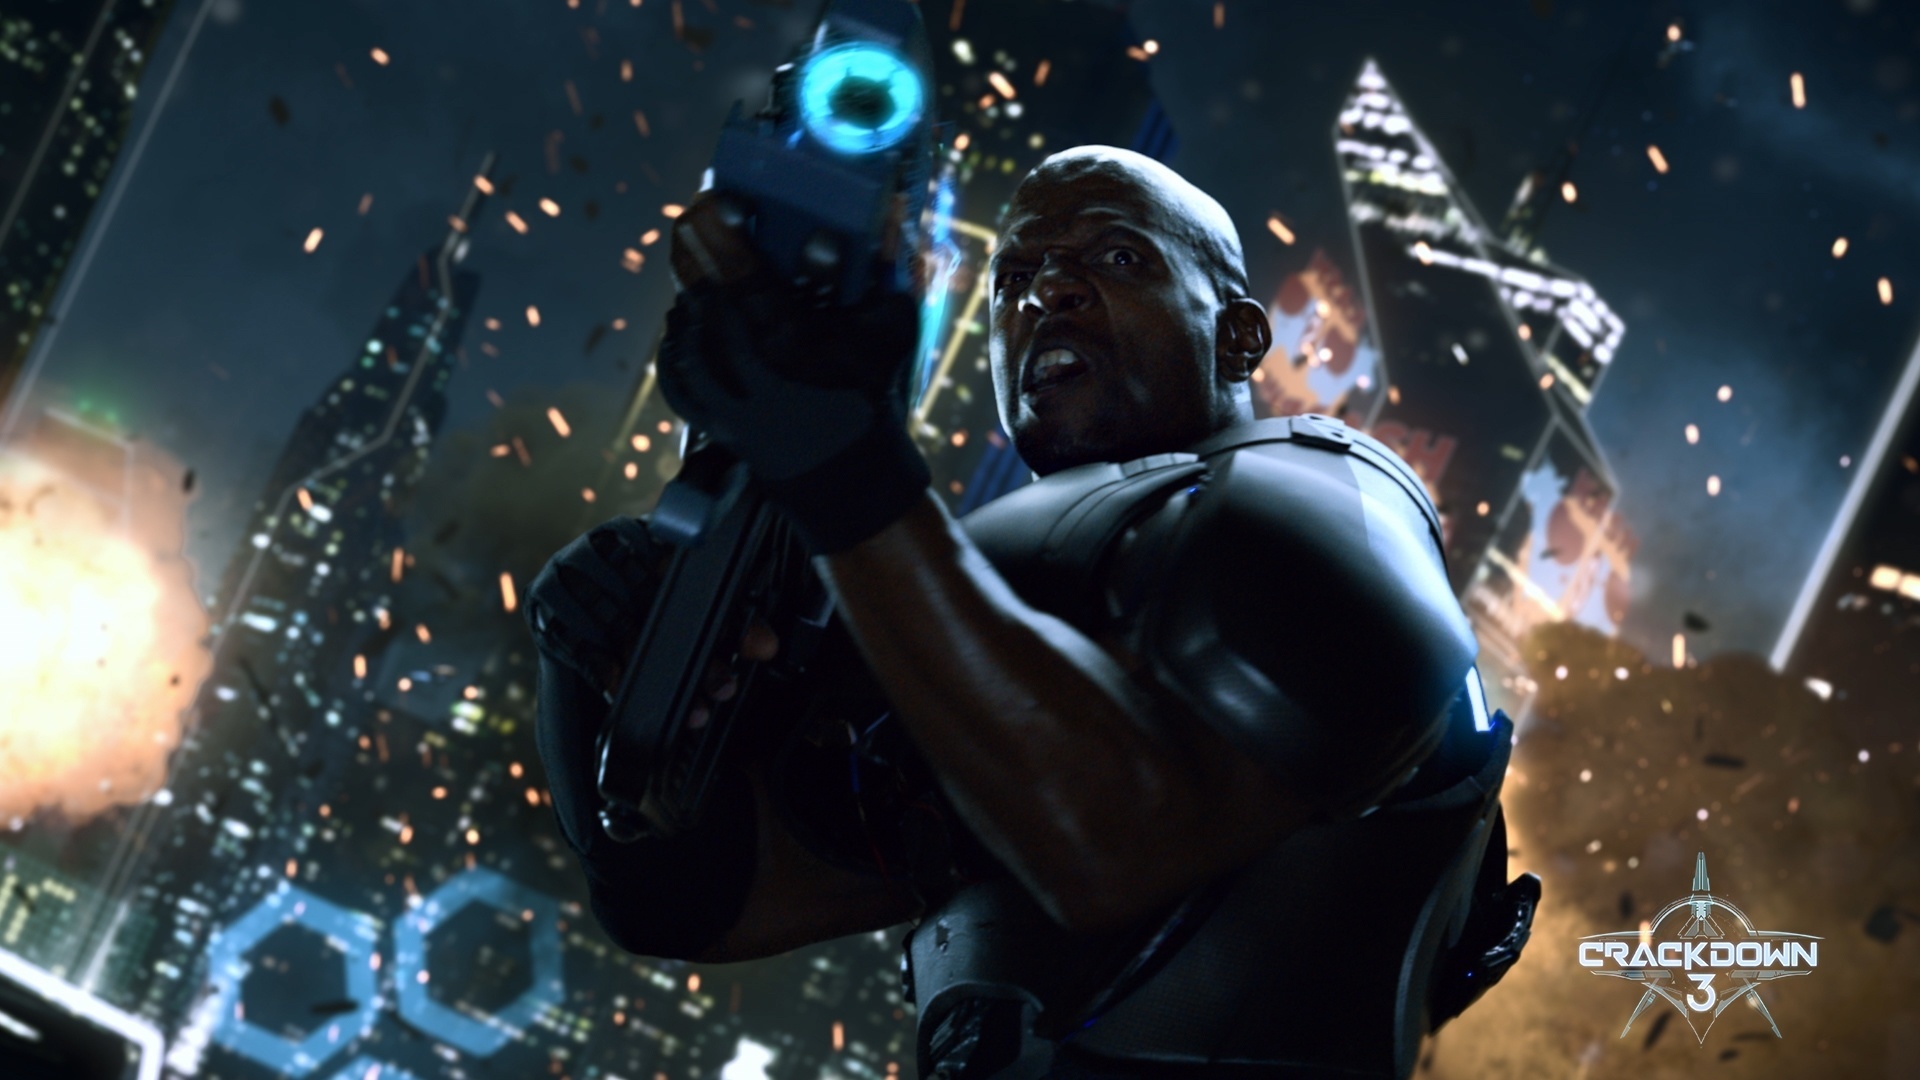 Crackdown 3, Video Game Backgrounds, Video Game, Crackdown - Crackdown 3 , HD Wallpaper & Backgrounds